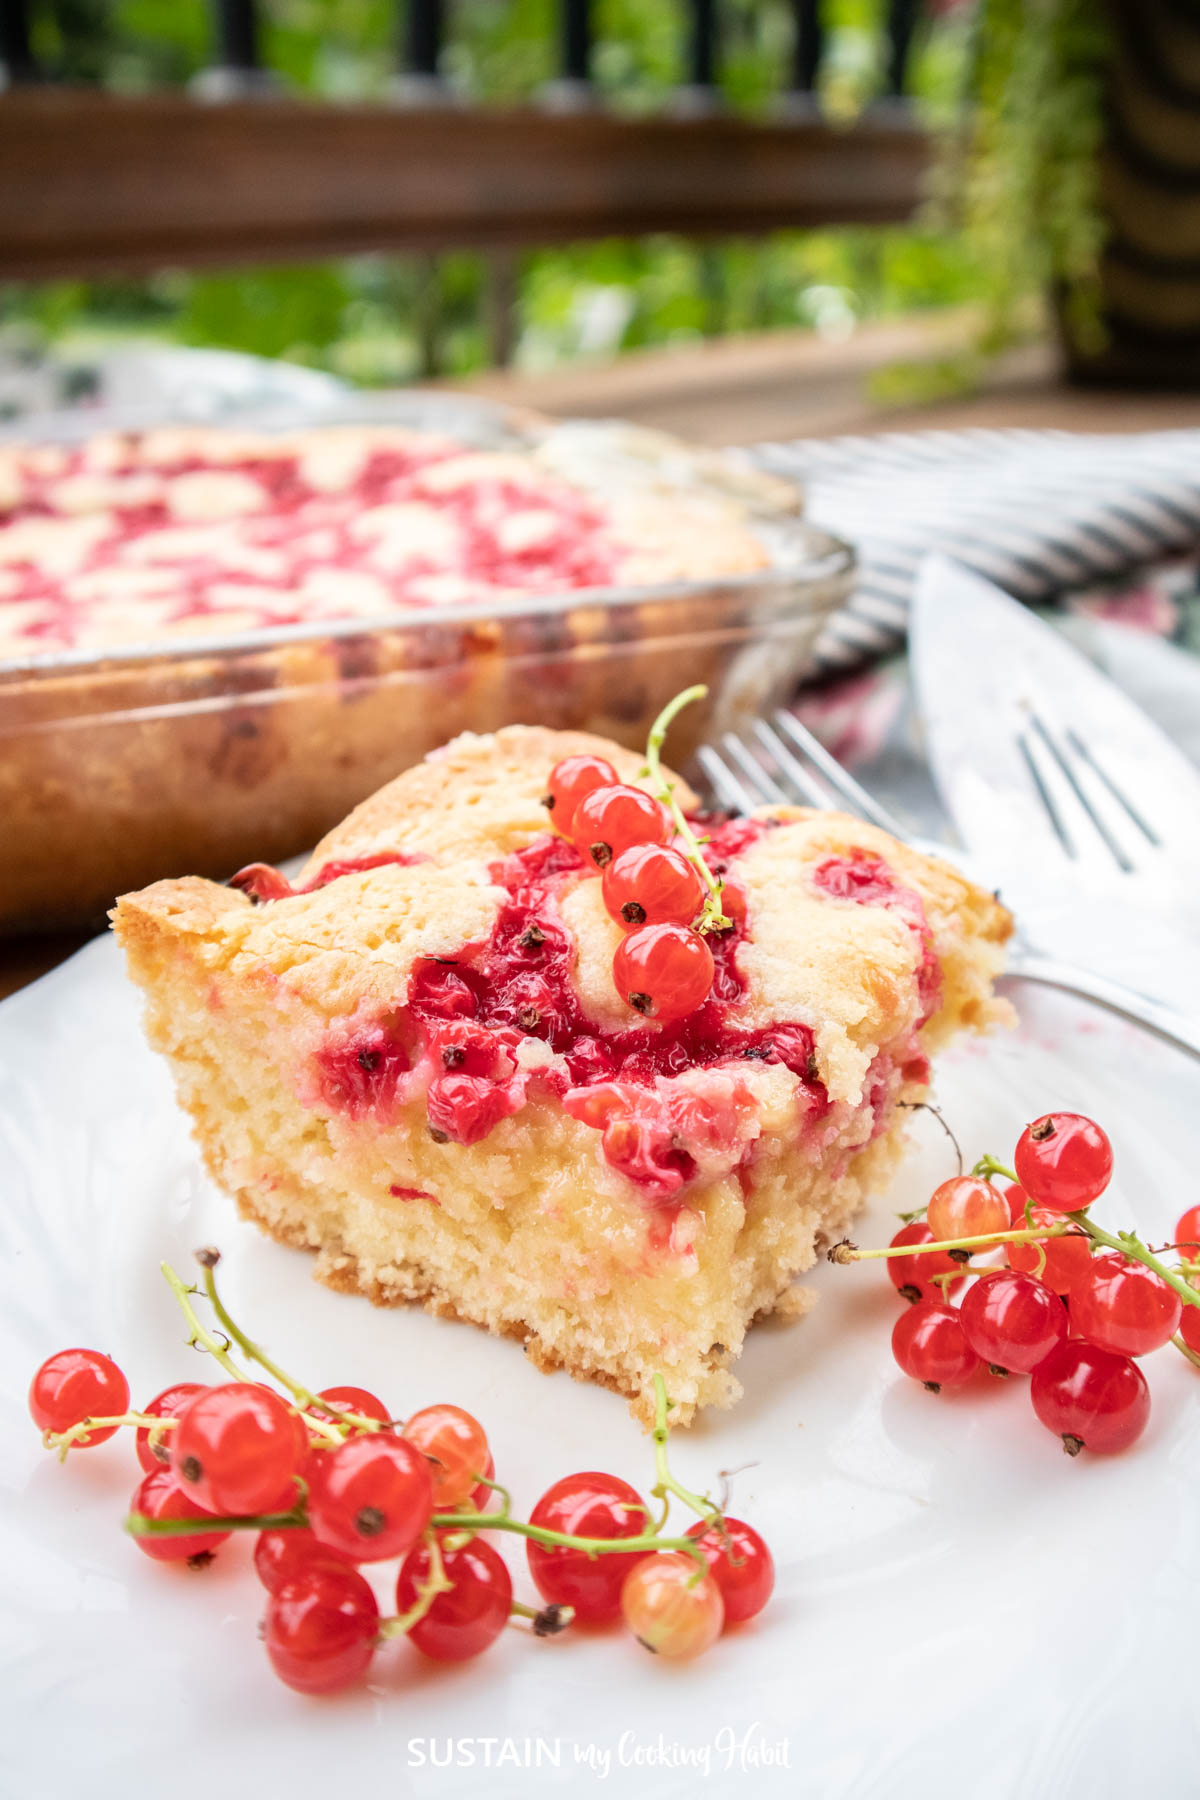 Slice of red currant cake on a plate with fresh red currants.